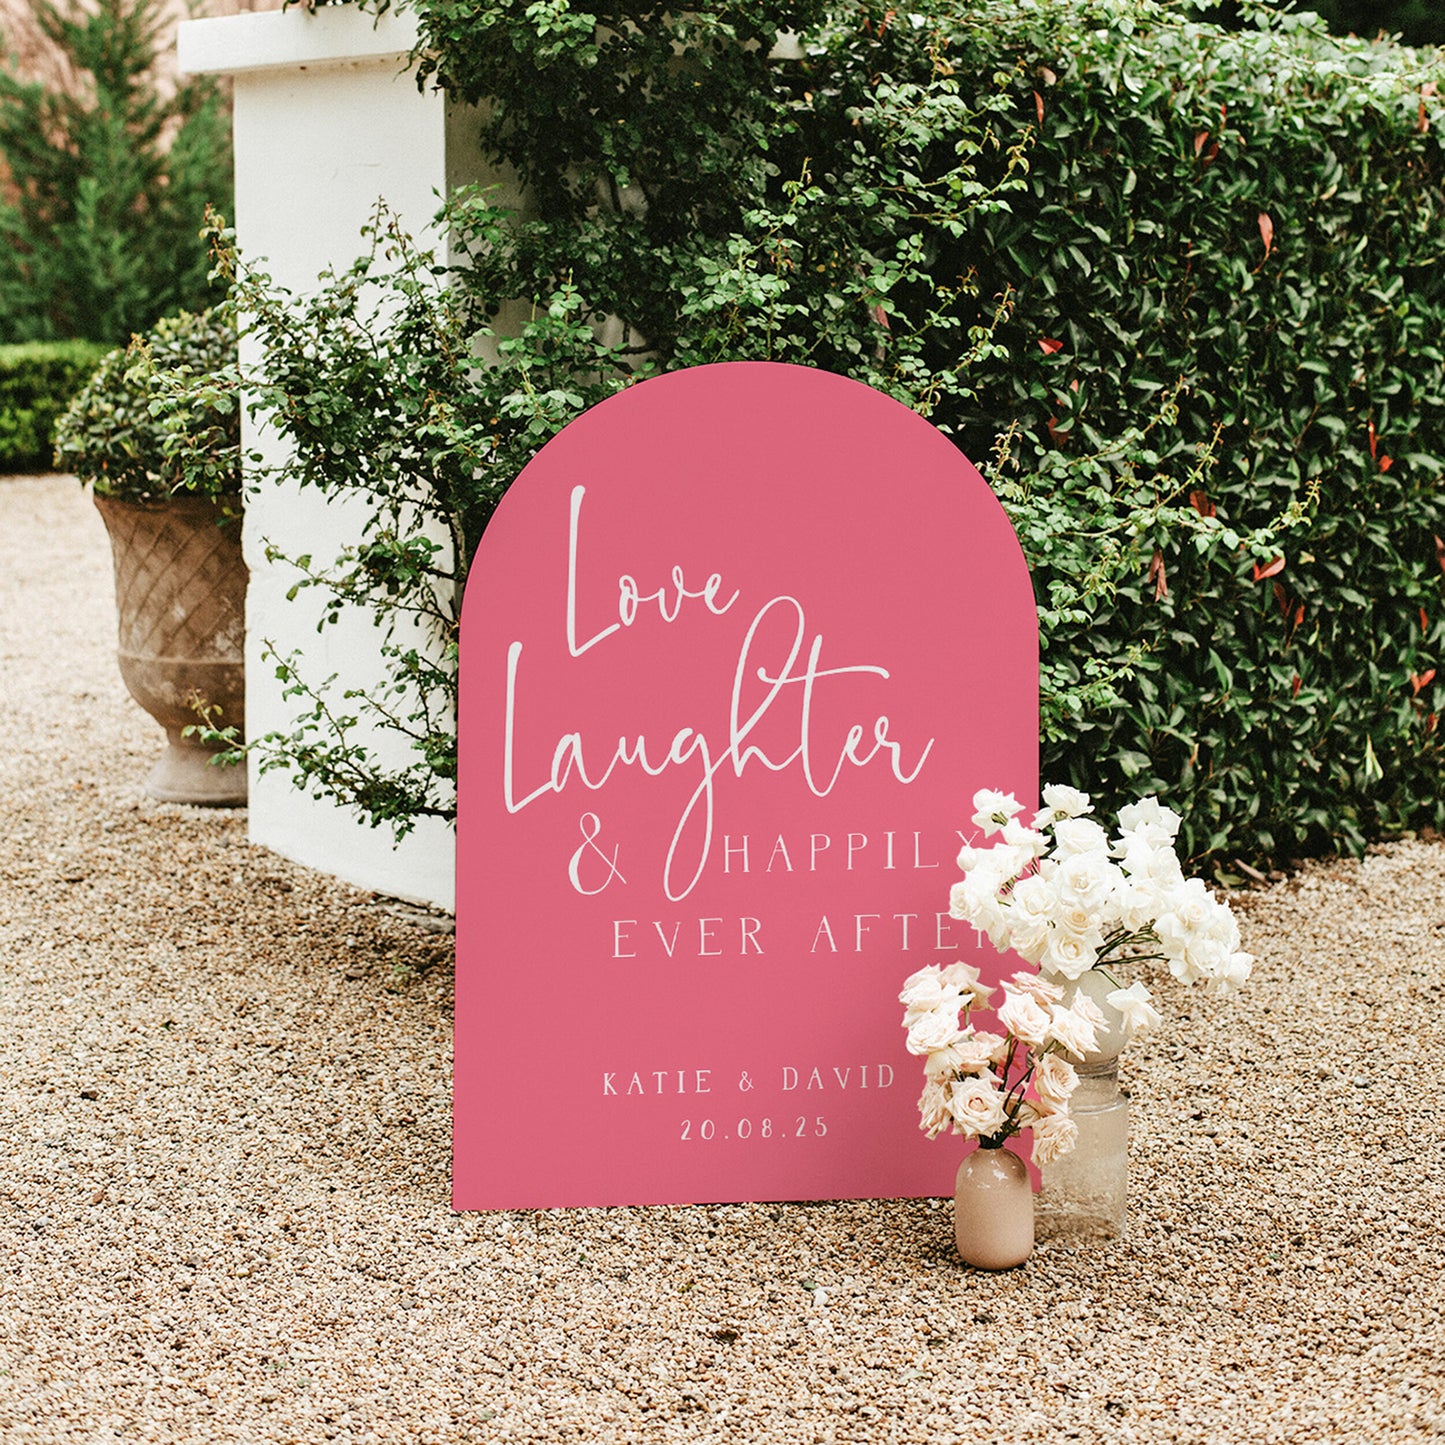 Hot pink arched wedding sign with quote